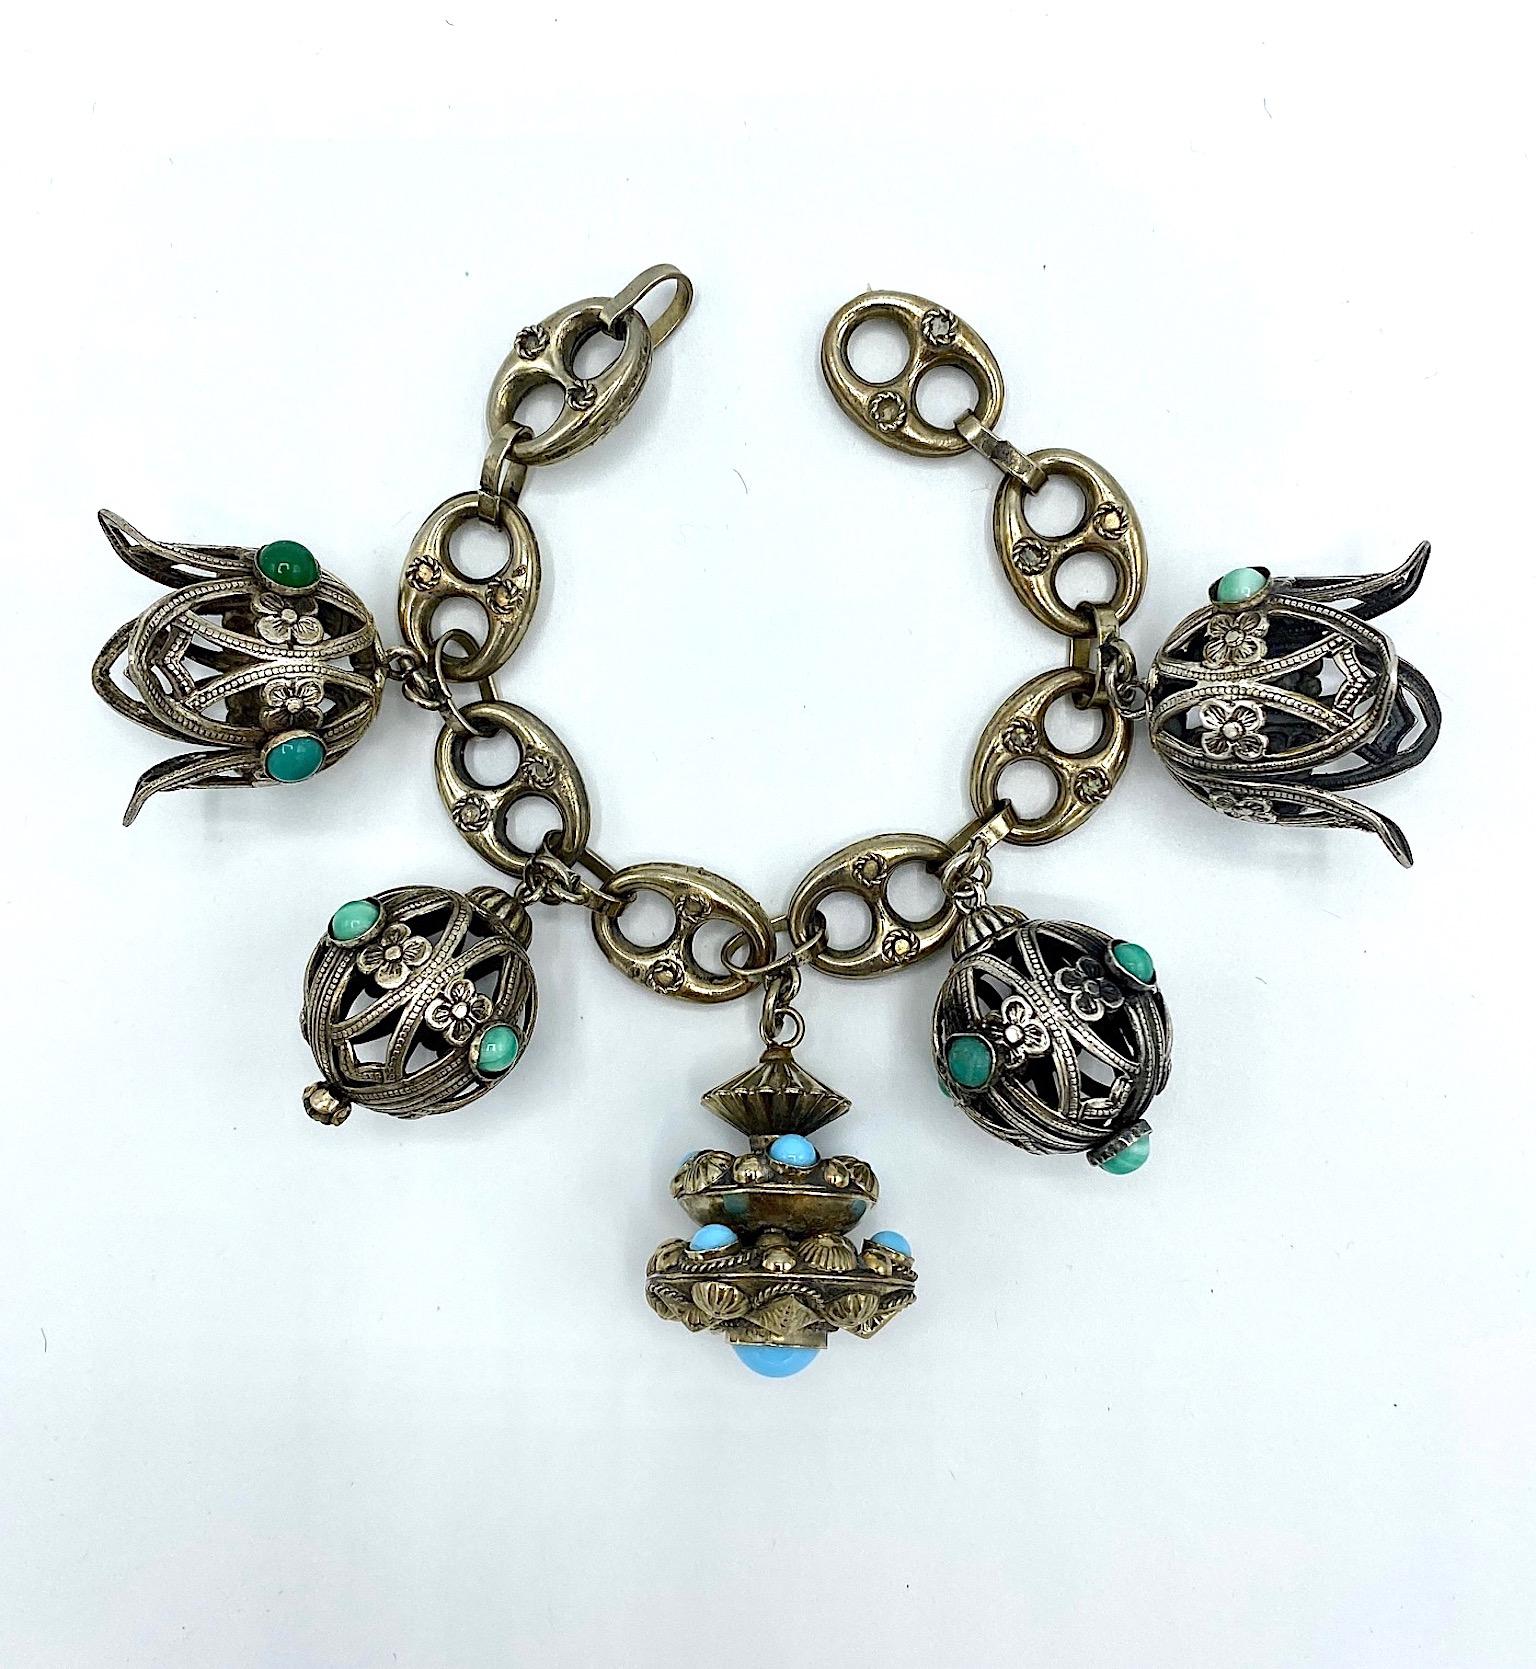 A large and intricately hand made 1940s Italian 800 silver in the Etruscan style. There are four charms in cutwork silver and one large central charm without cutwork. All are set with hand made glass green or blue color cabochons. The bracelet is